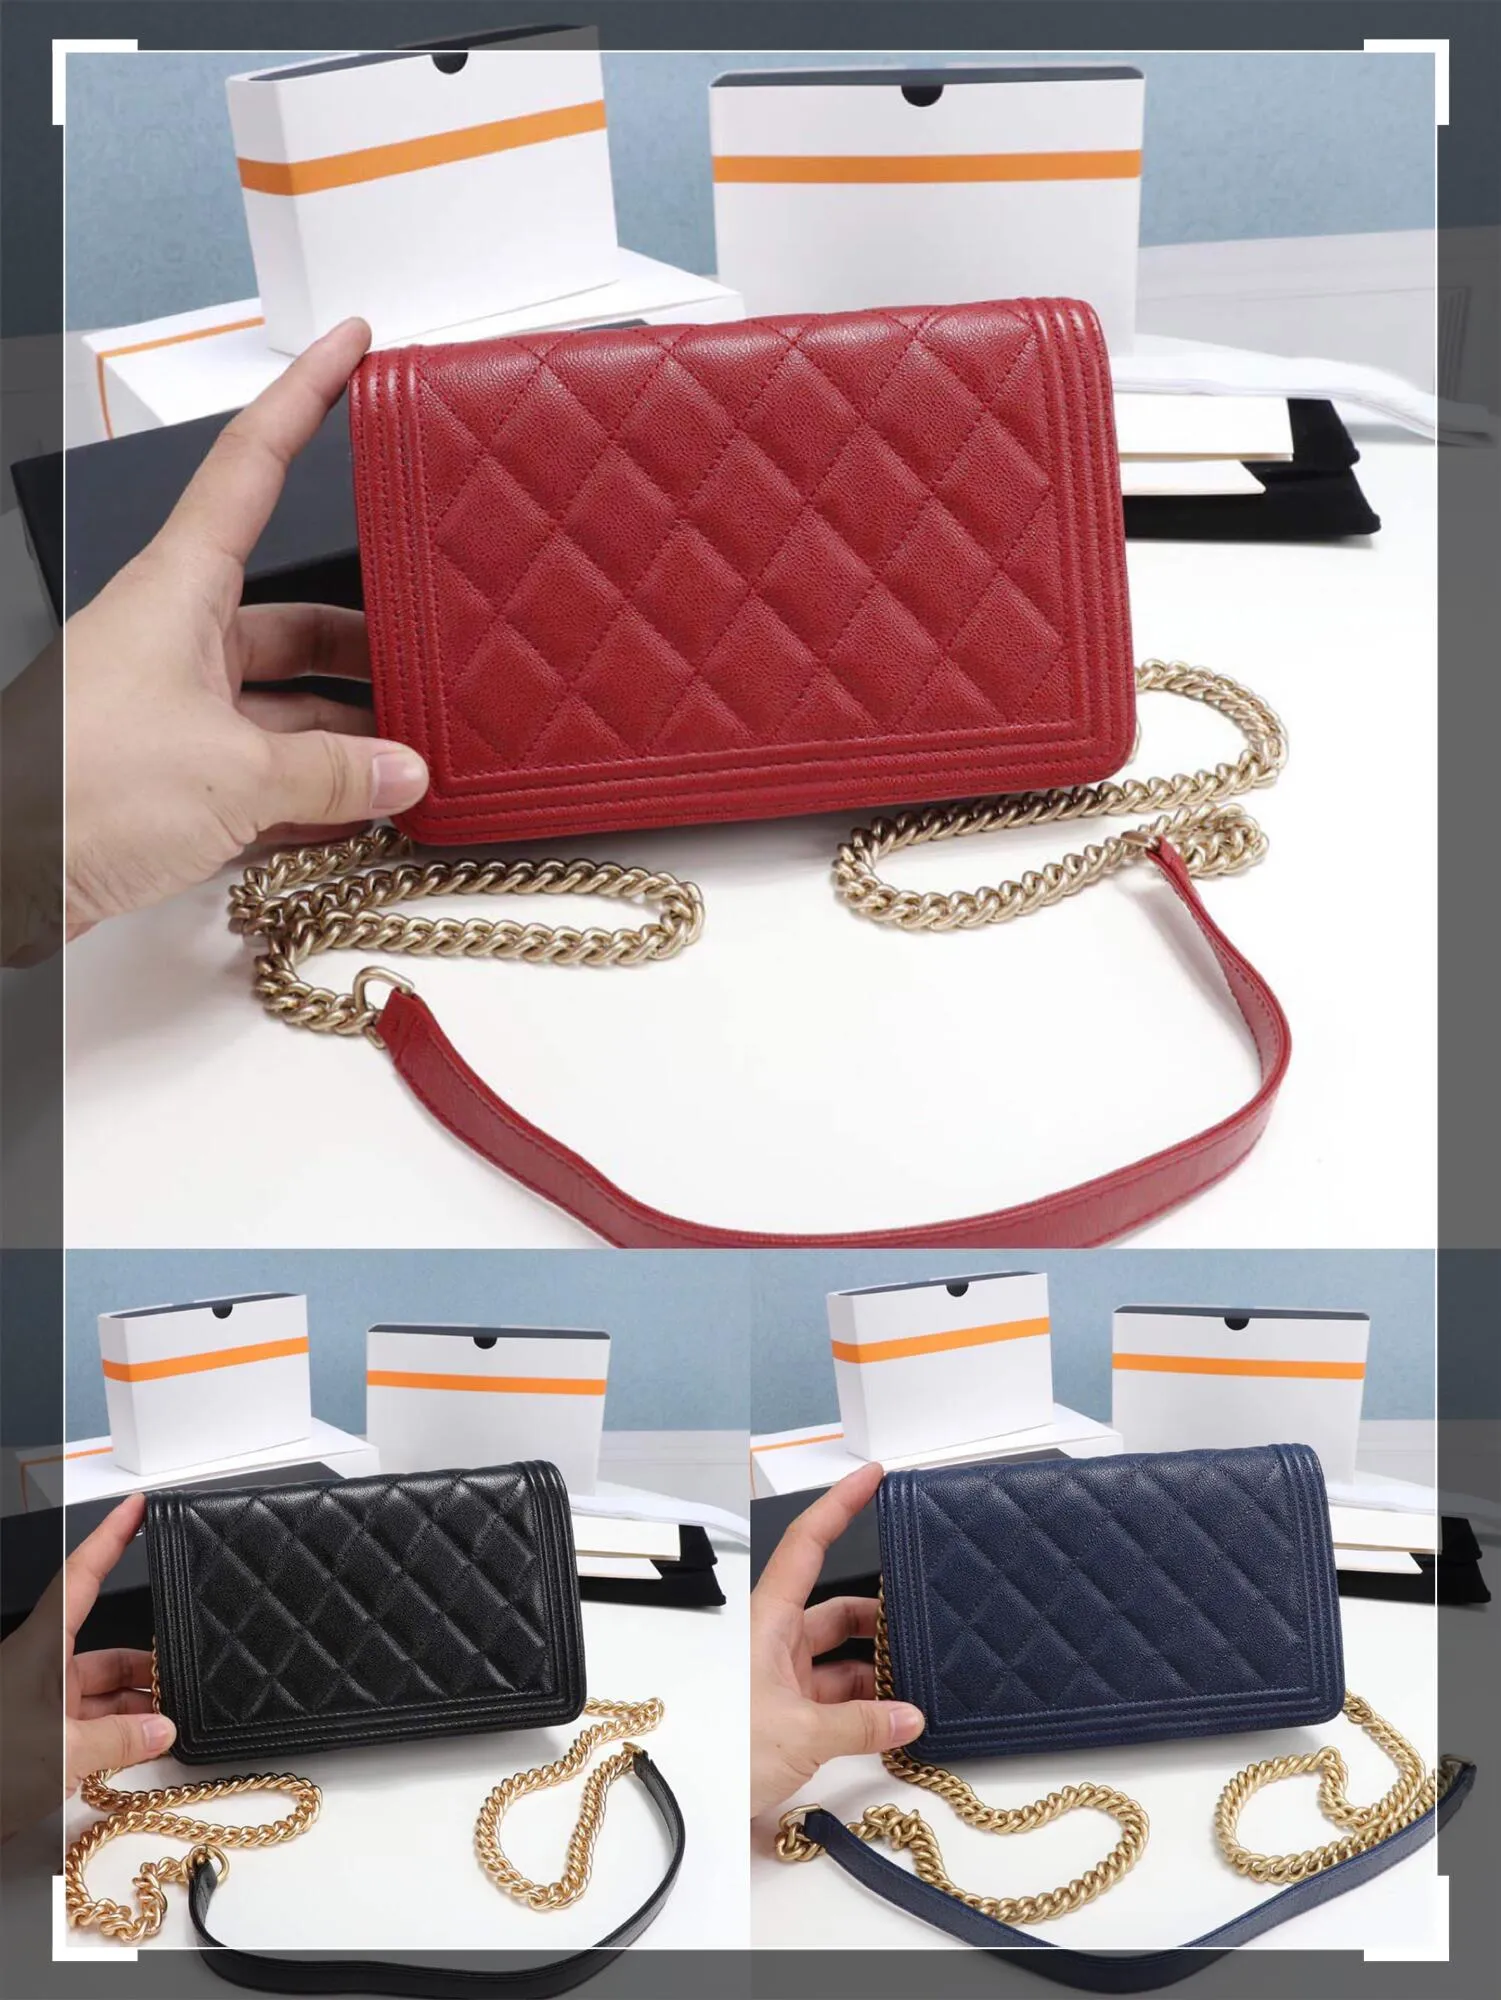 2021 Men's Women's Wallet Coin Purse Card Case Leather Casual Fashion 13-19.5-3.5 A81969